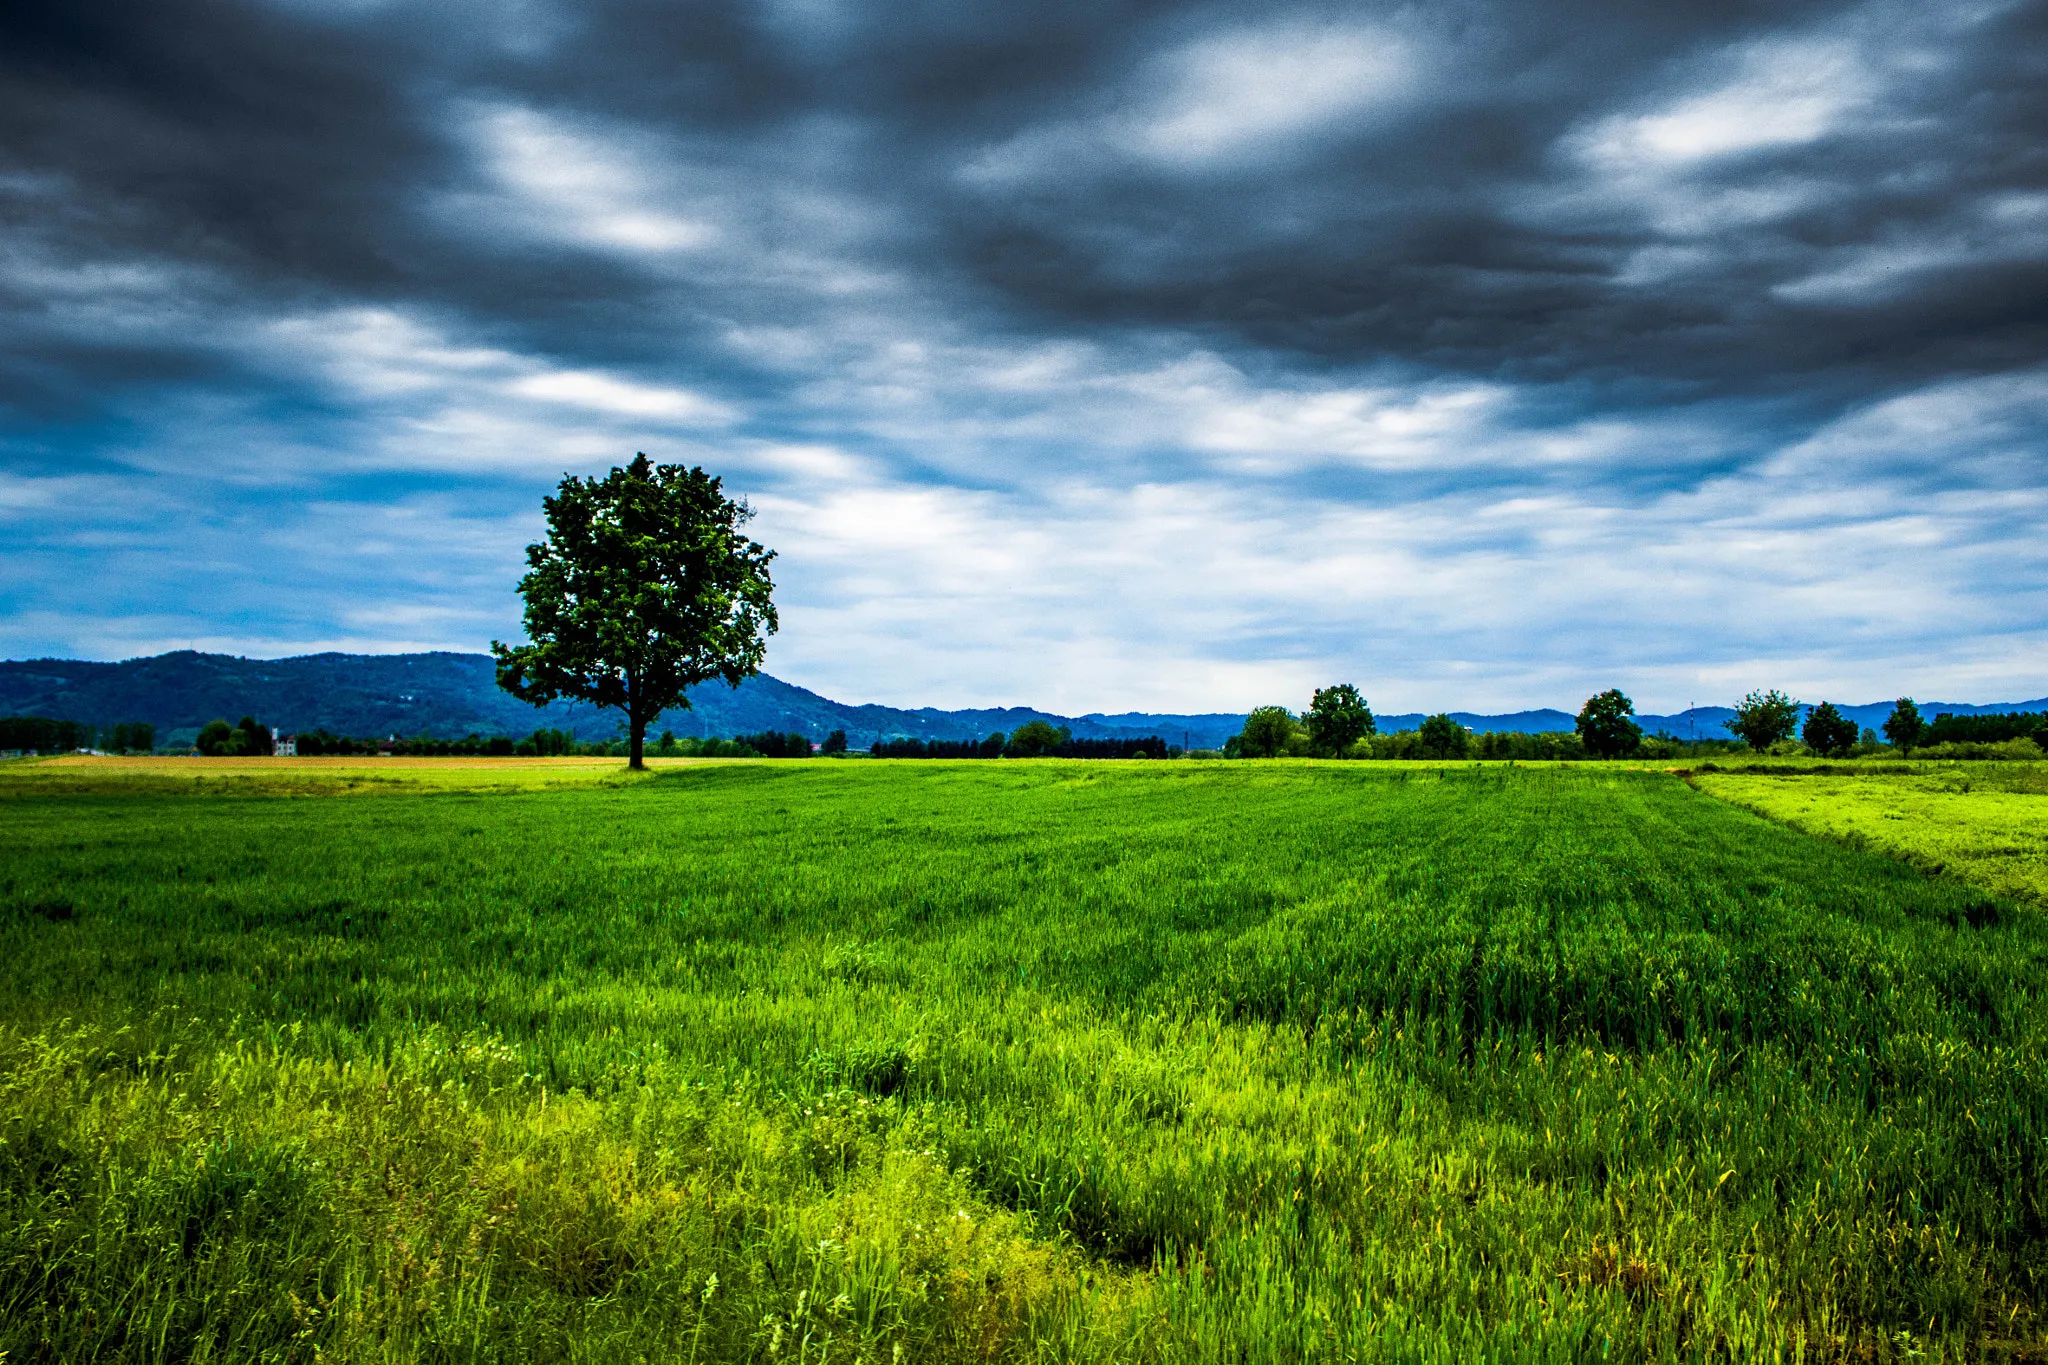 Photo showing: 500px provided description: A tree stands alone, meditative atop of a green field, with a hat made of blue and grey clouds, in front of the biggest mountain range system in Europe, the Alps. [#field ,#landscape ,#nature ,#clouds ,#cloudy ,#tree ,#green ,#landscapes ,#fields ,#cloud ,#meditative ,#nature photograph ,#nature pics ,#immersive]